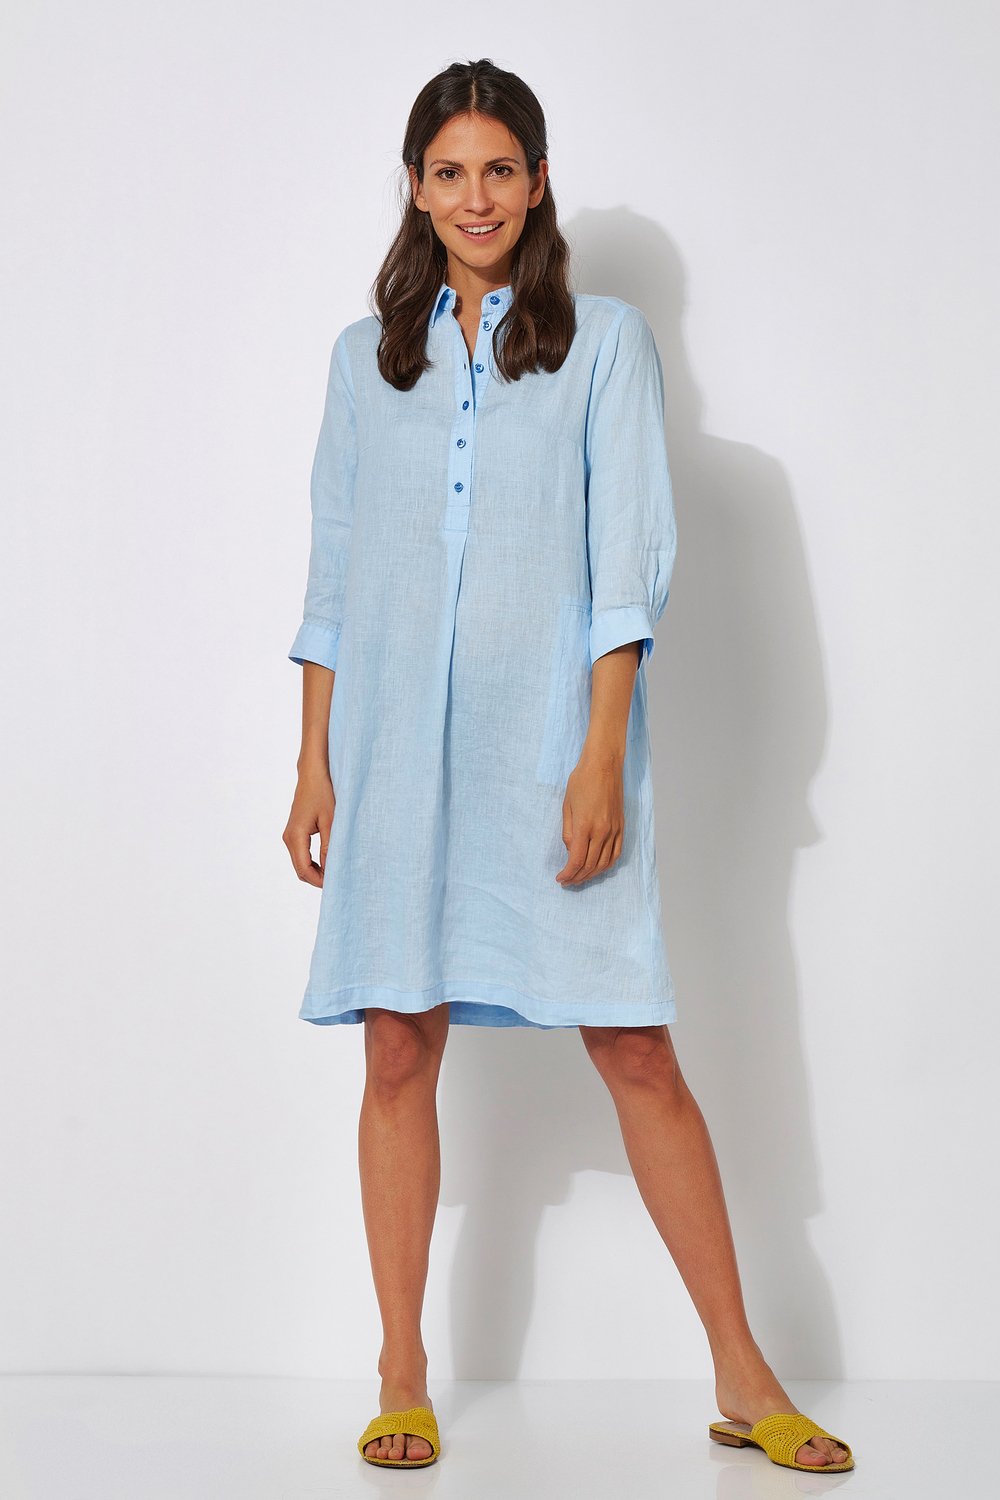 Relaxed linen dress | Style »Aila« soft blue